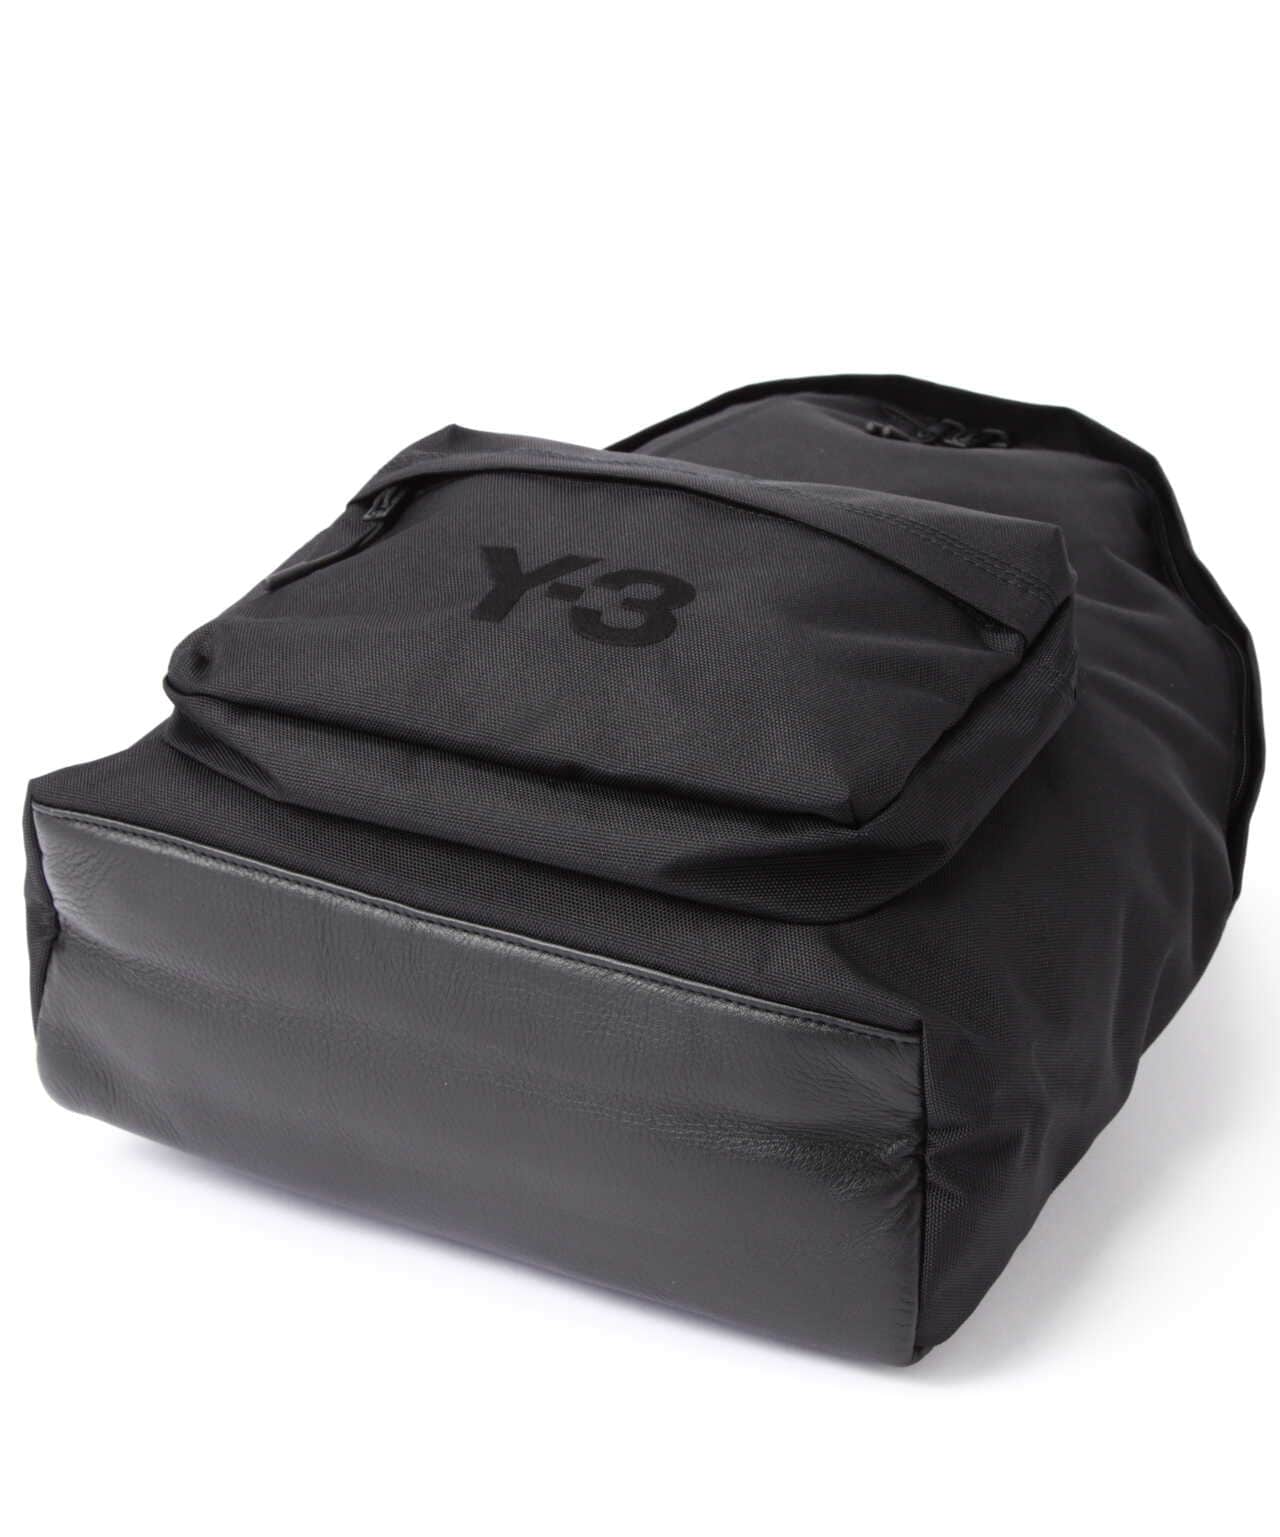 Y-3/ワイスリー/CLASSIC BACK PACK/クラシックバックパック